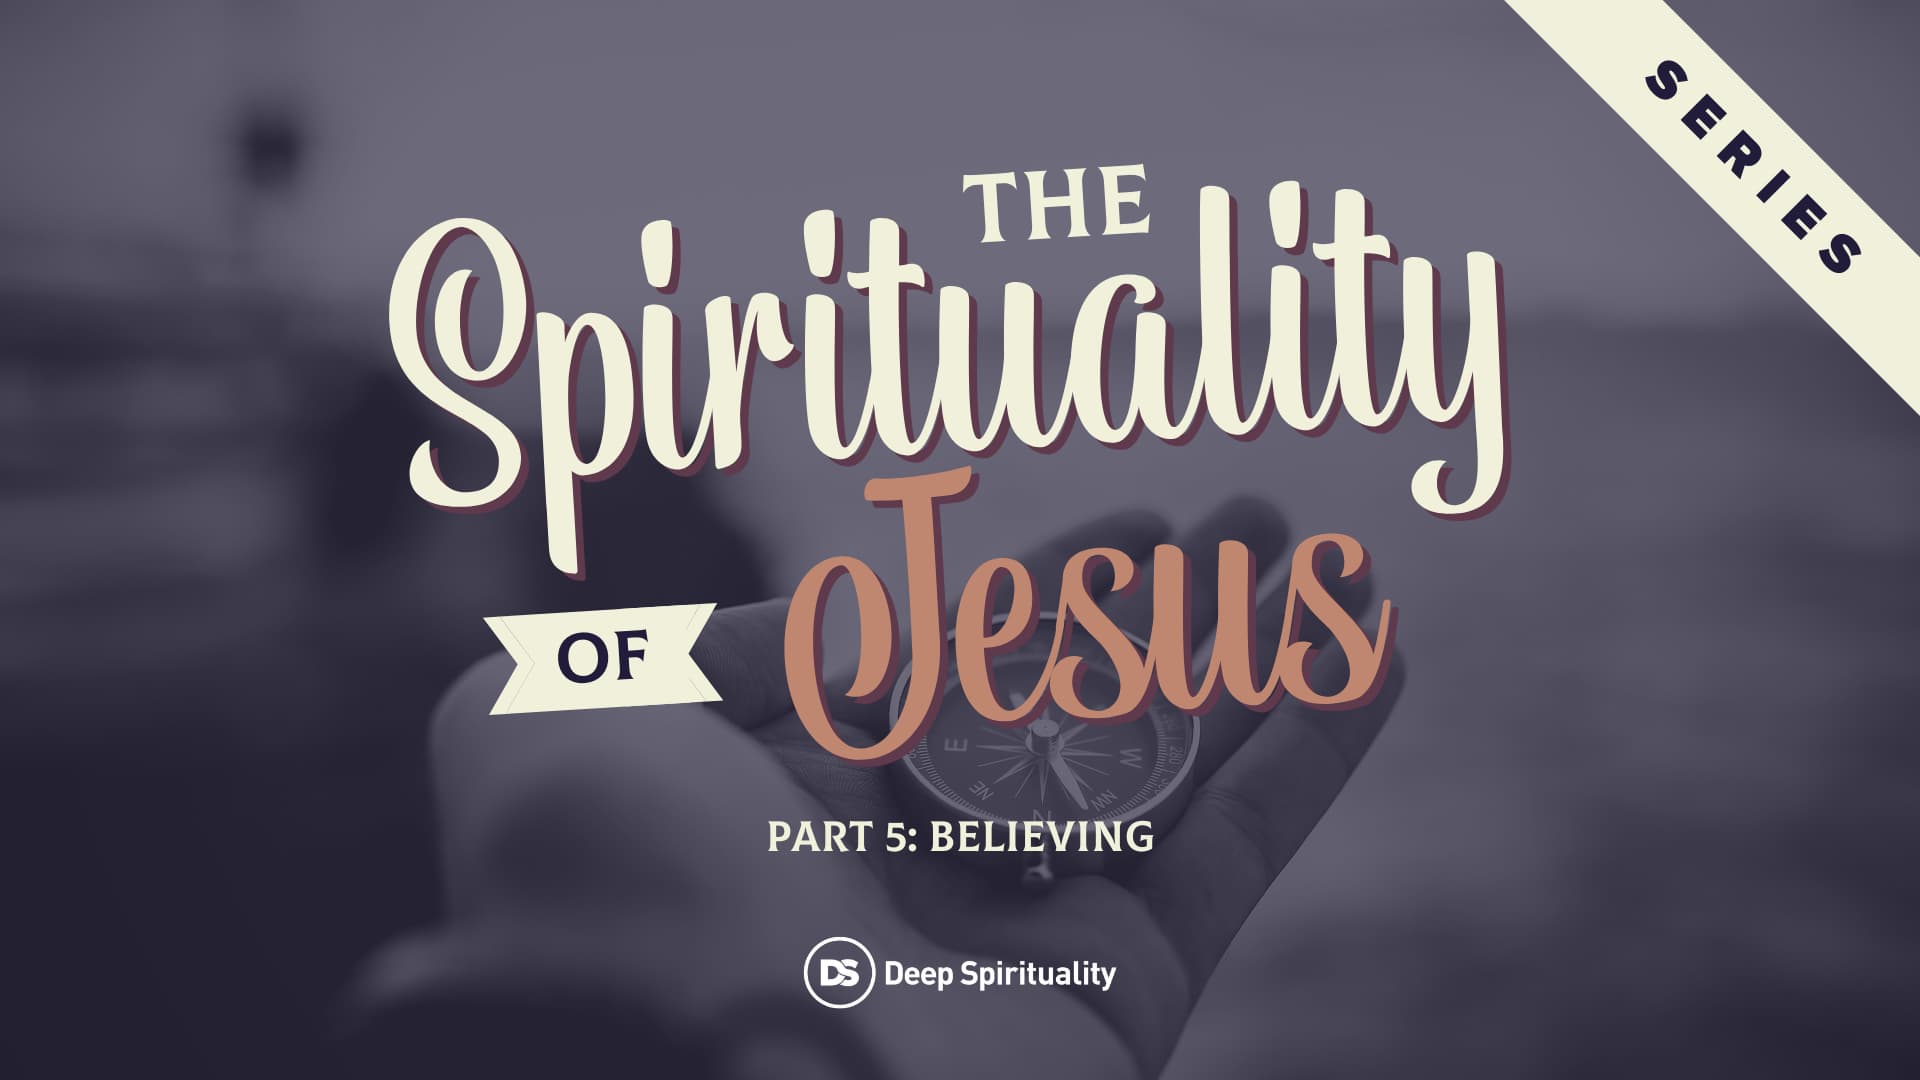 The Spirituality of Jesus, Part 5: Believing 8